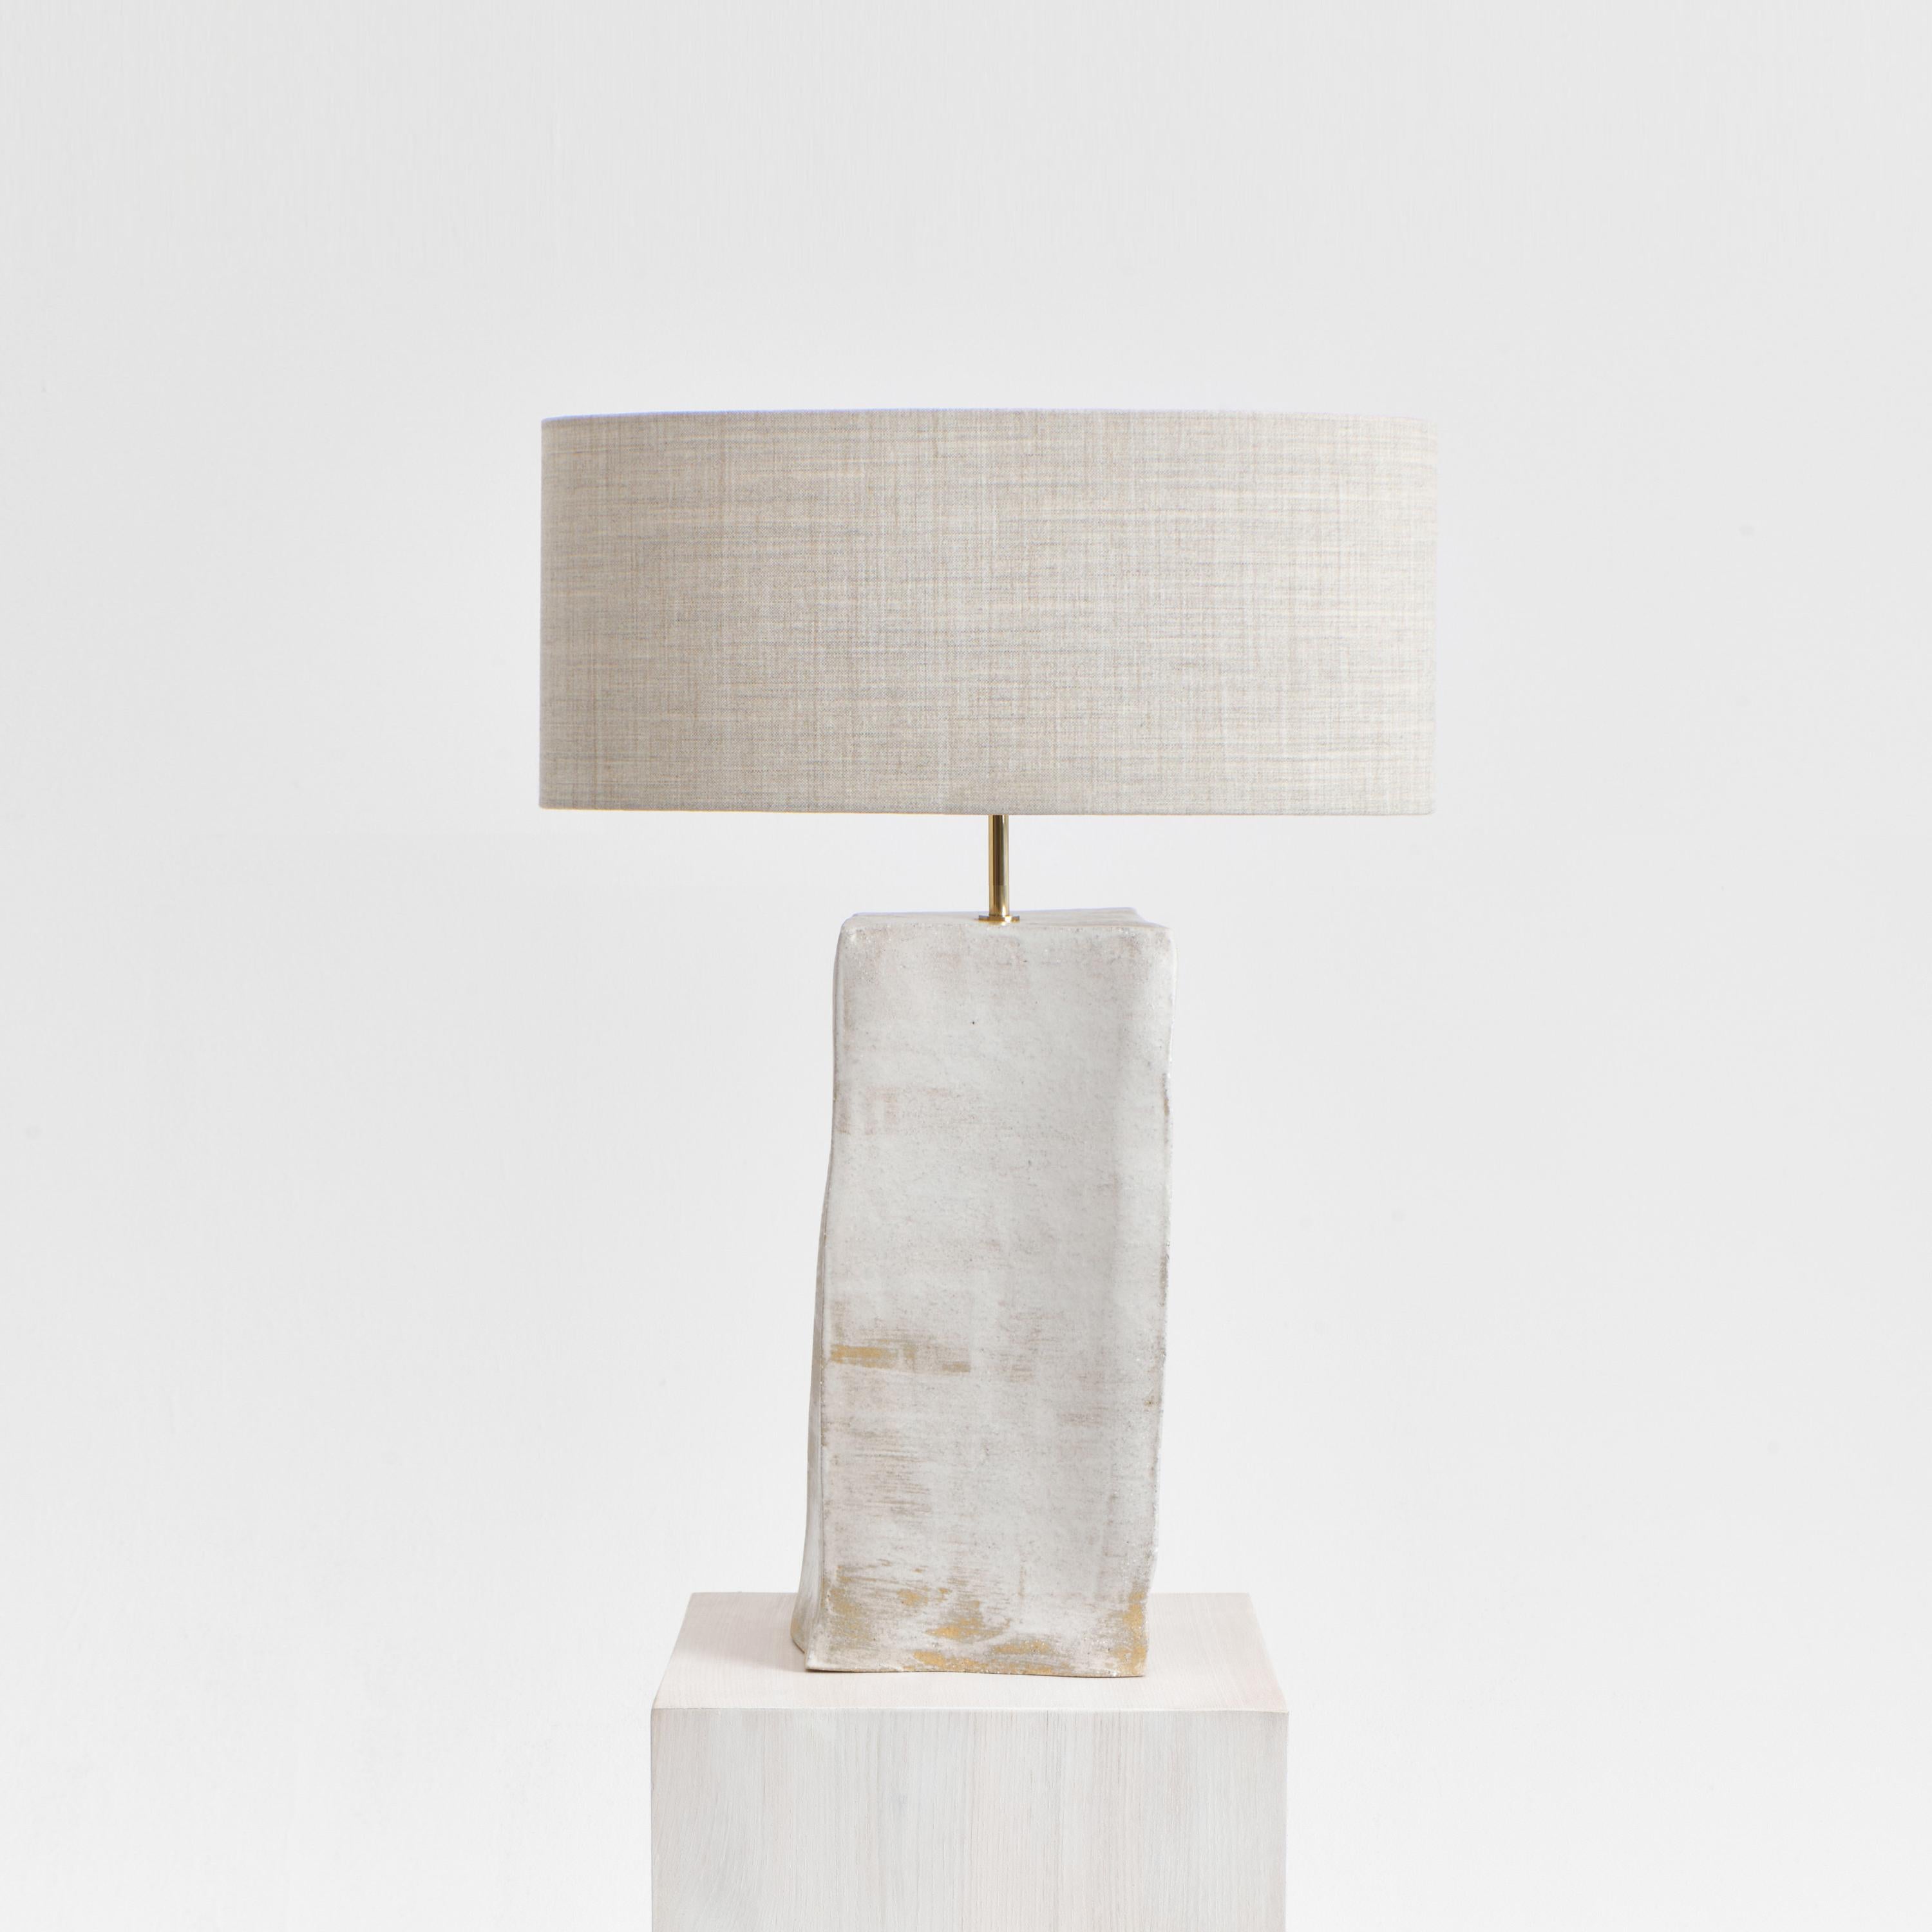 Rectangular Ceramic Light in brushed white
Designed by Project 213A in 2023

Artisanal ceramic light with a rectangular base, made in Project 213A's own ceramic workshop. It has a brass stem and a oval shaped lampshade made from 90%wool, 10% worst